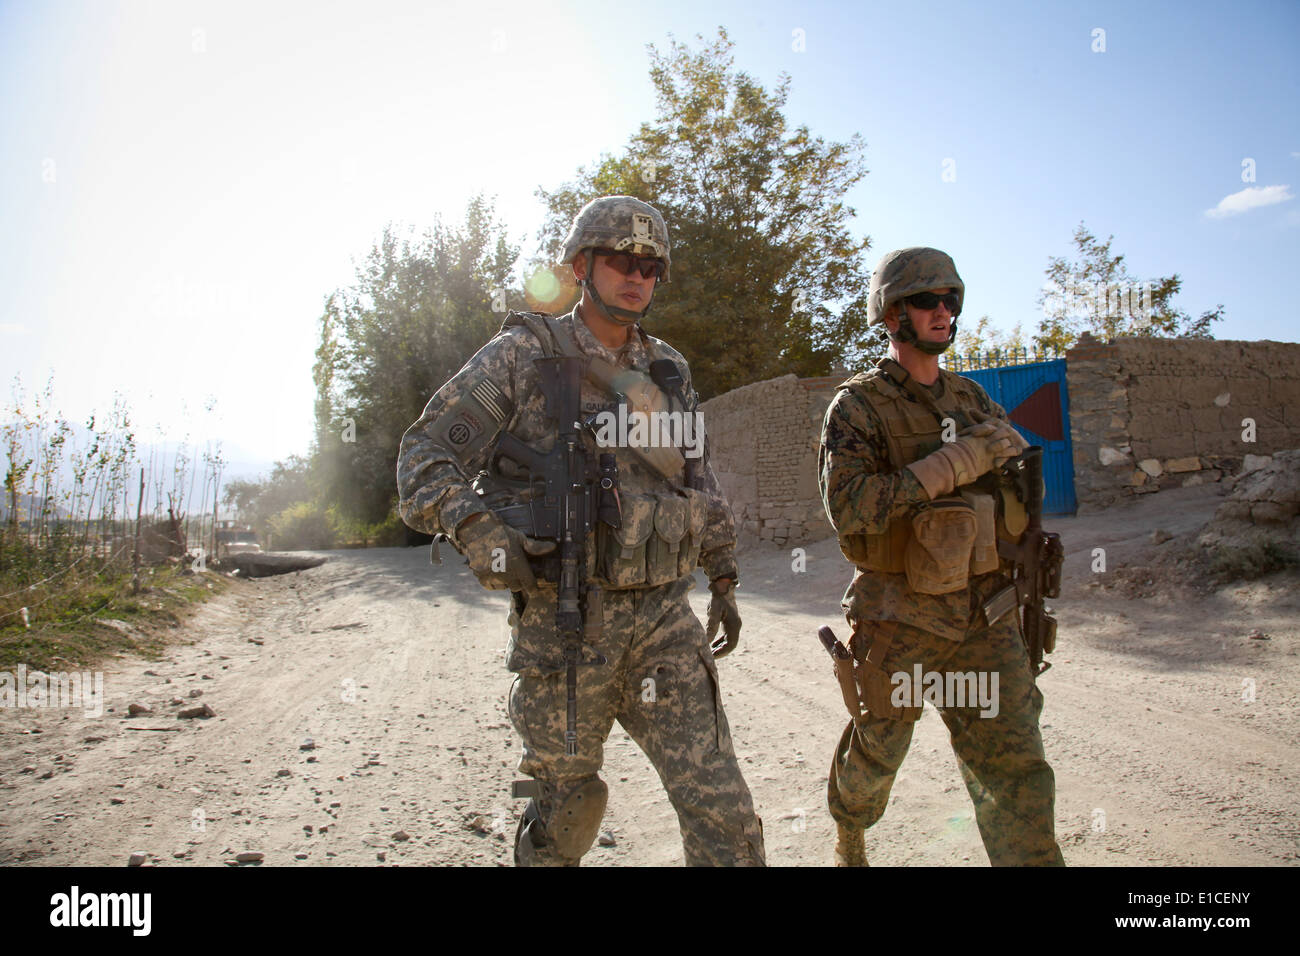 U.S. Army Lt. Col. Kimo Gallahue and Marine Corps Lt. Col. Paul Brickley conduct a joint patrol in the Wardak province of Afgha Stock Photo